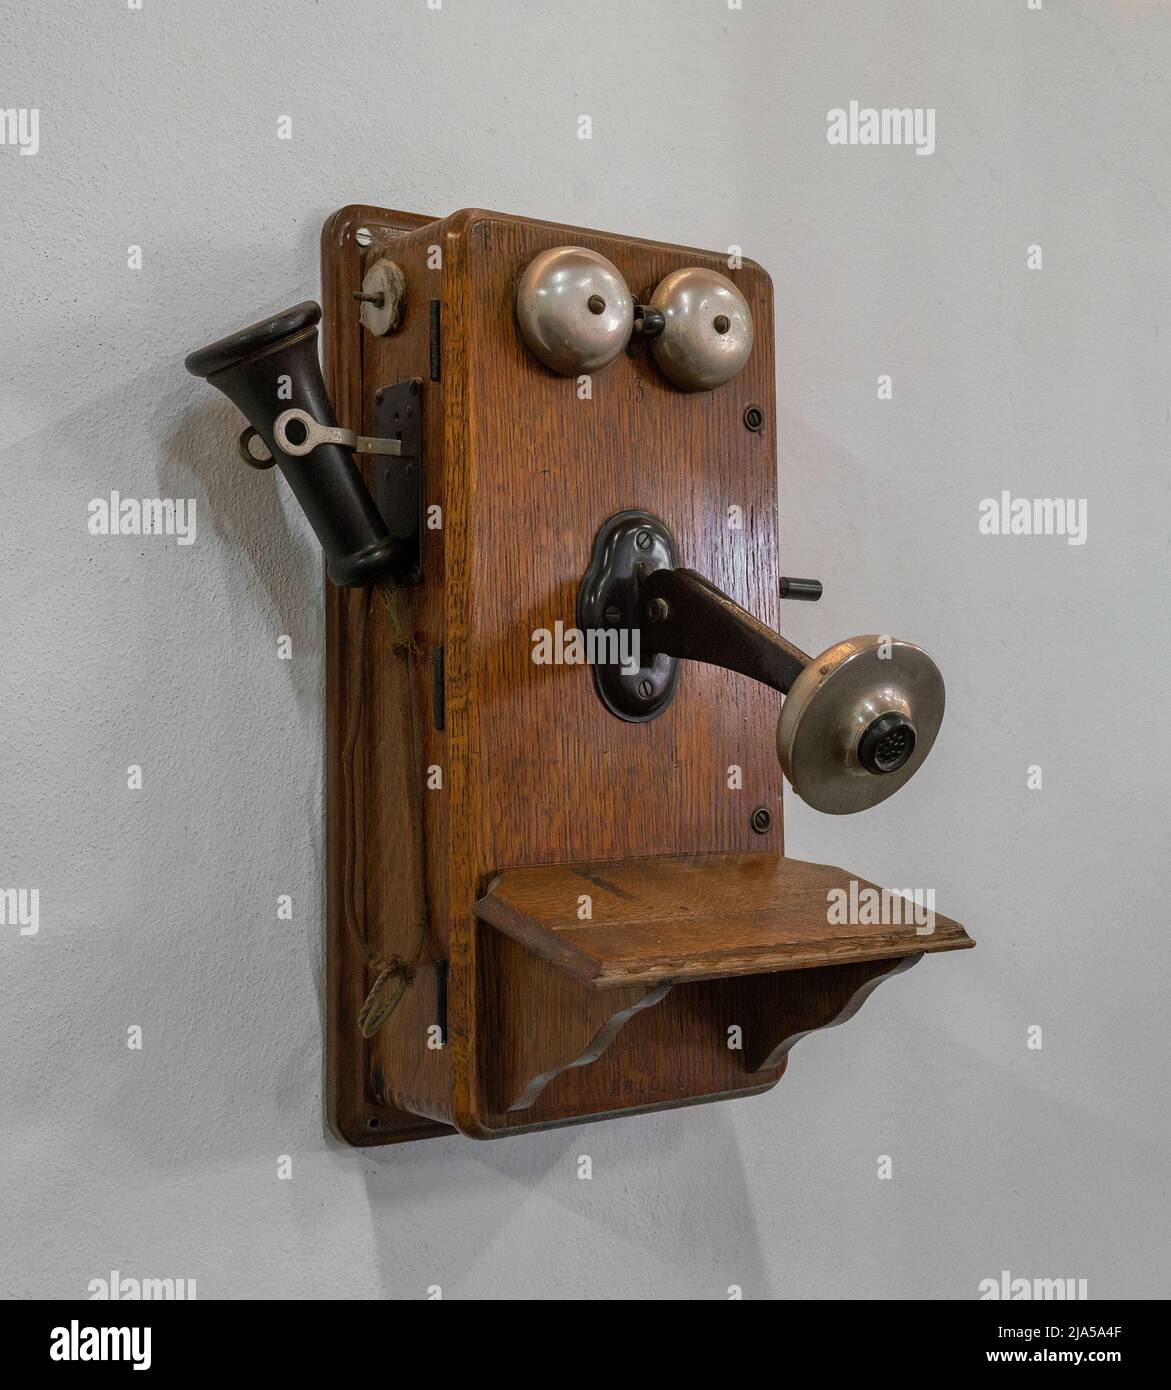 Antique Plain Front Wall Phone Stock Photo